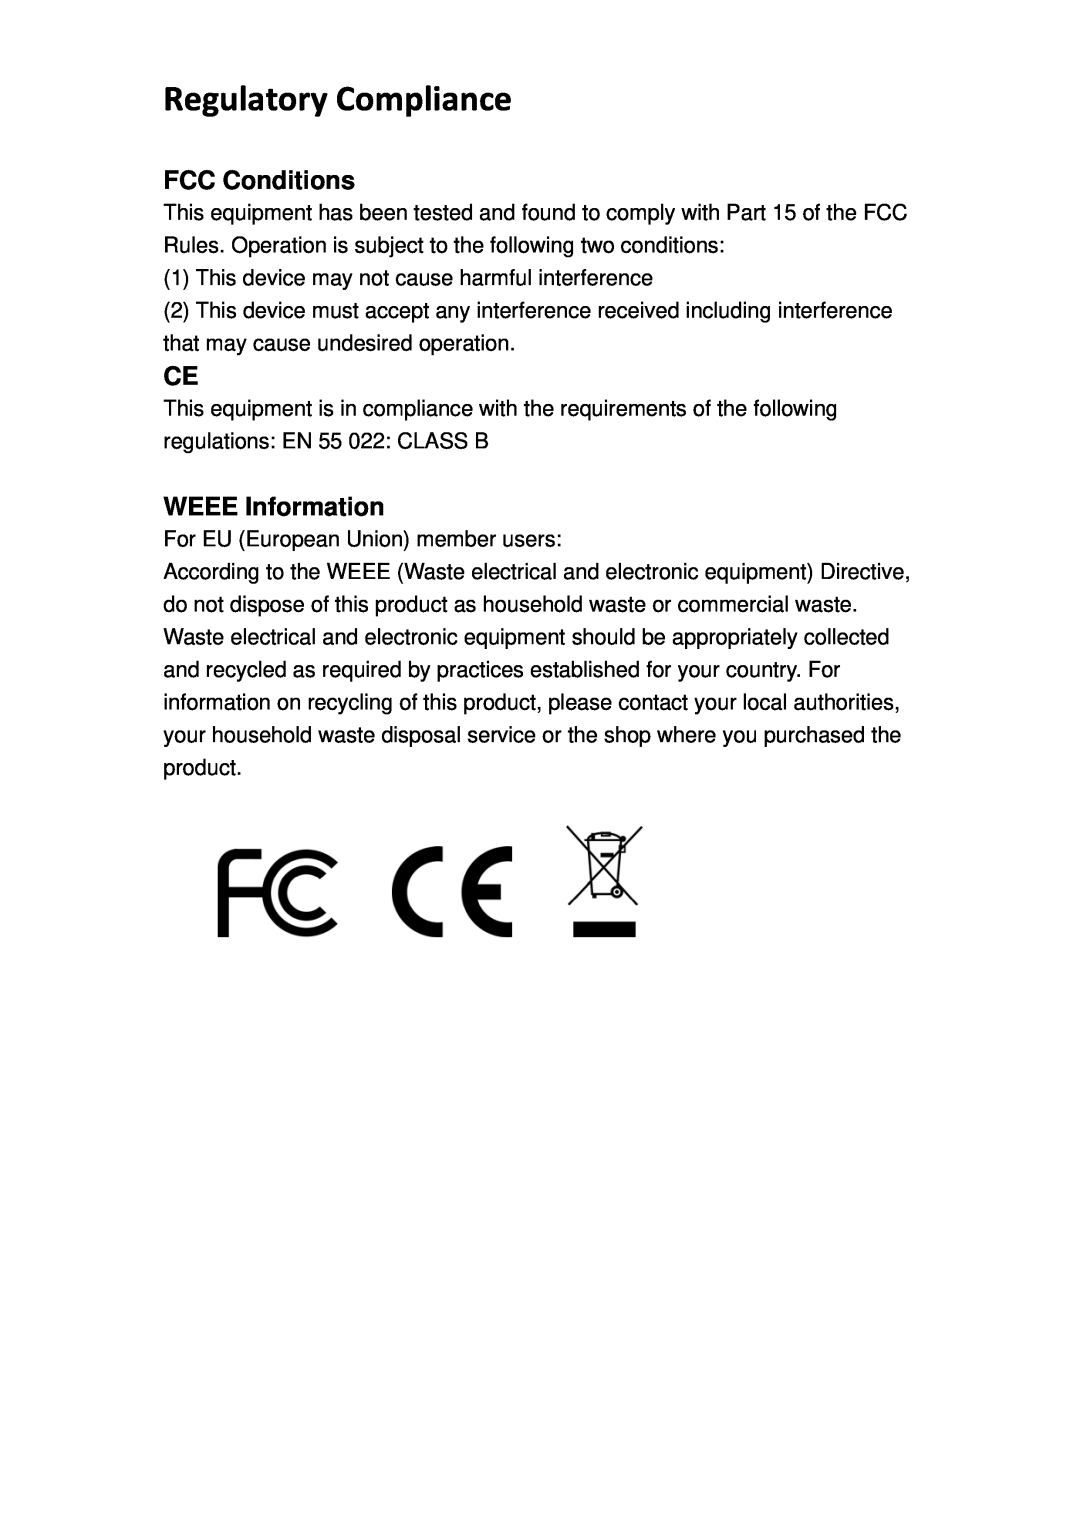 TRENDnet TU3S35 manual Regulatory Compliance, FCC Conditions, WEEE Information 